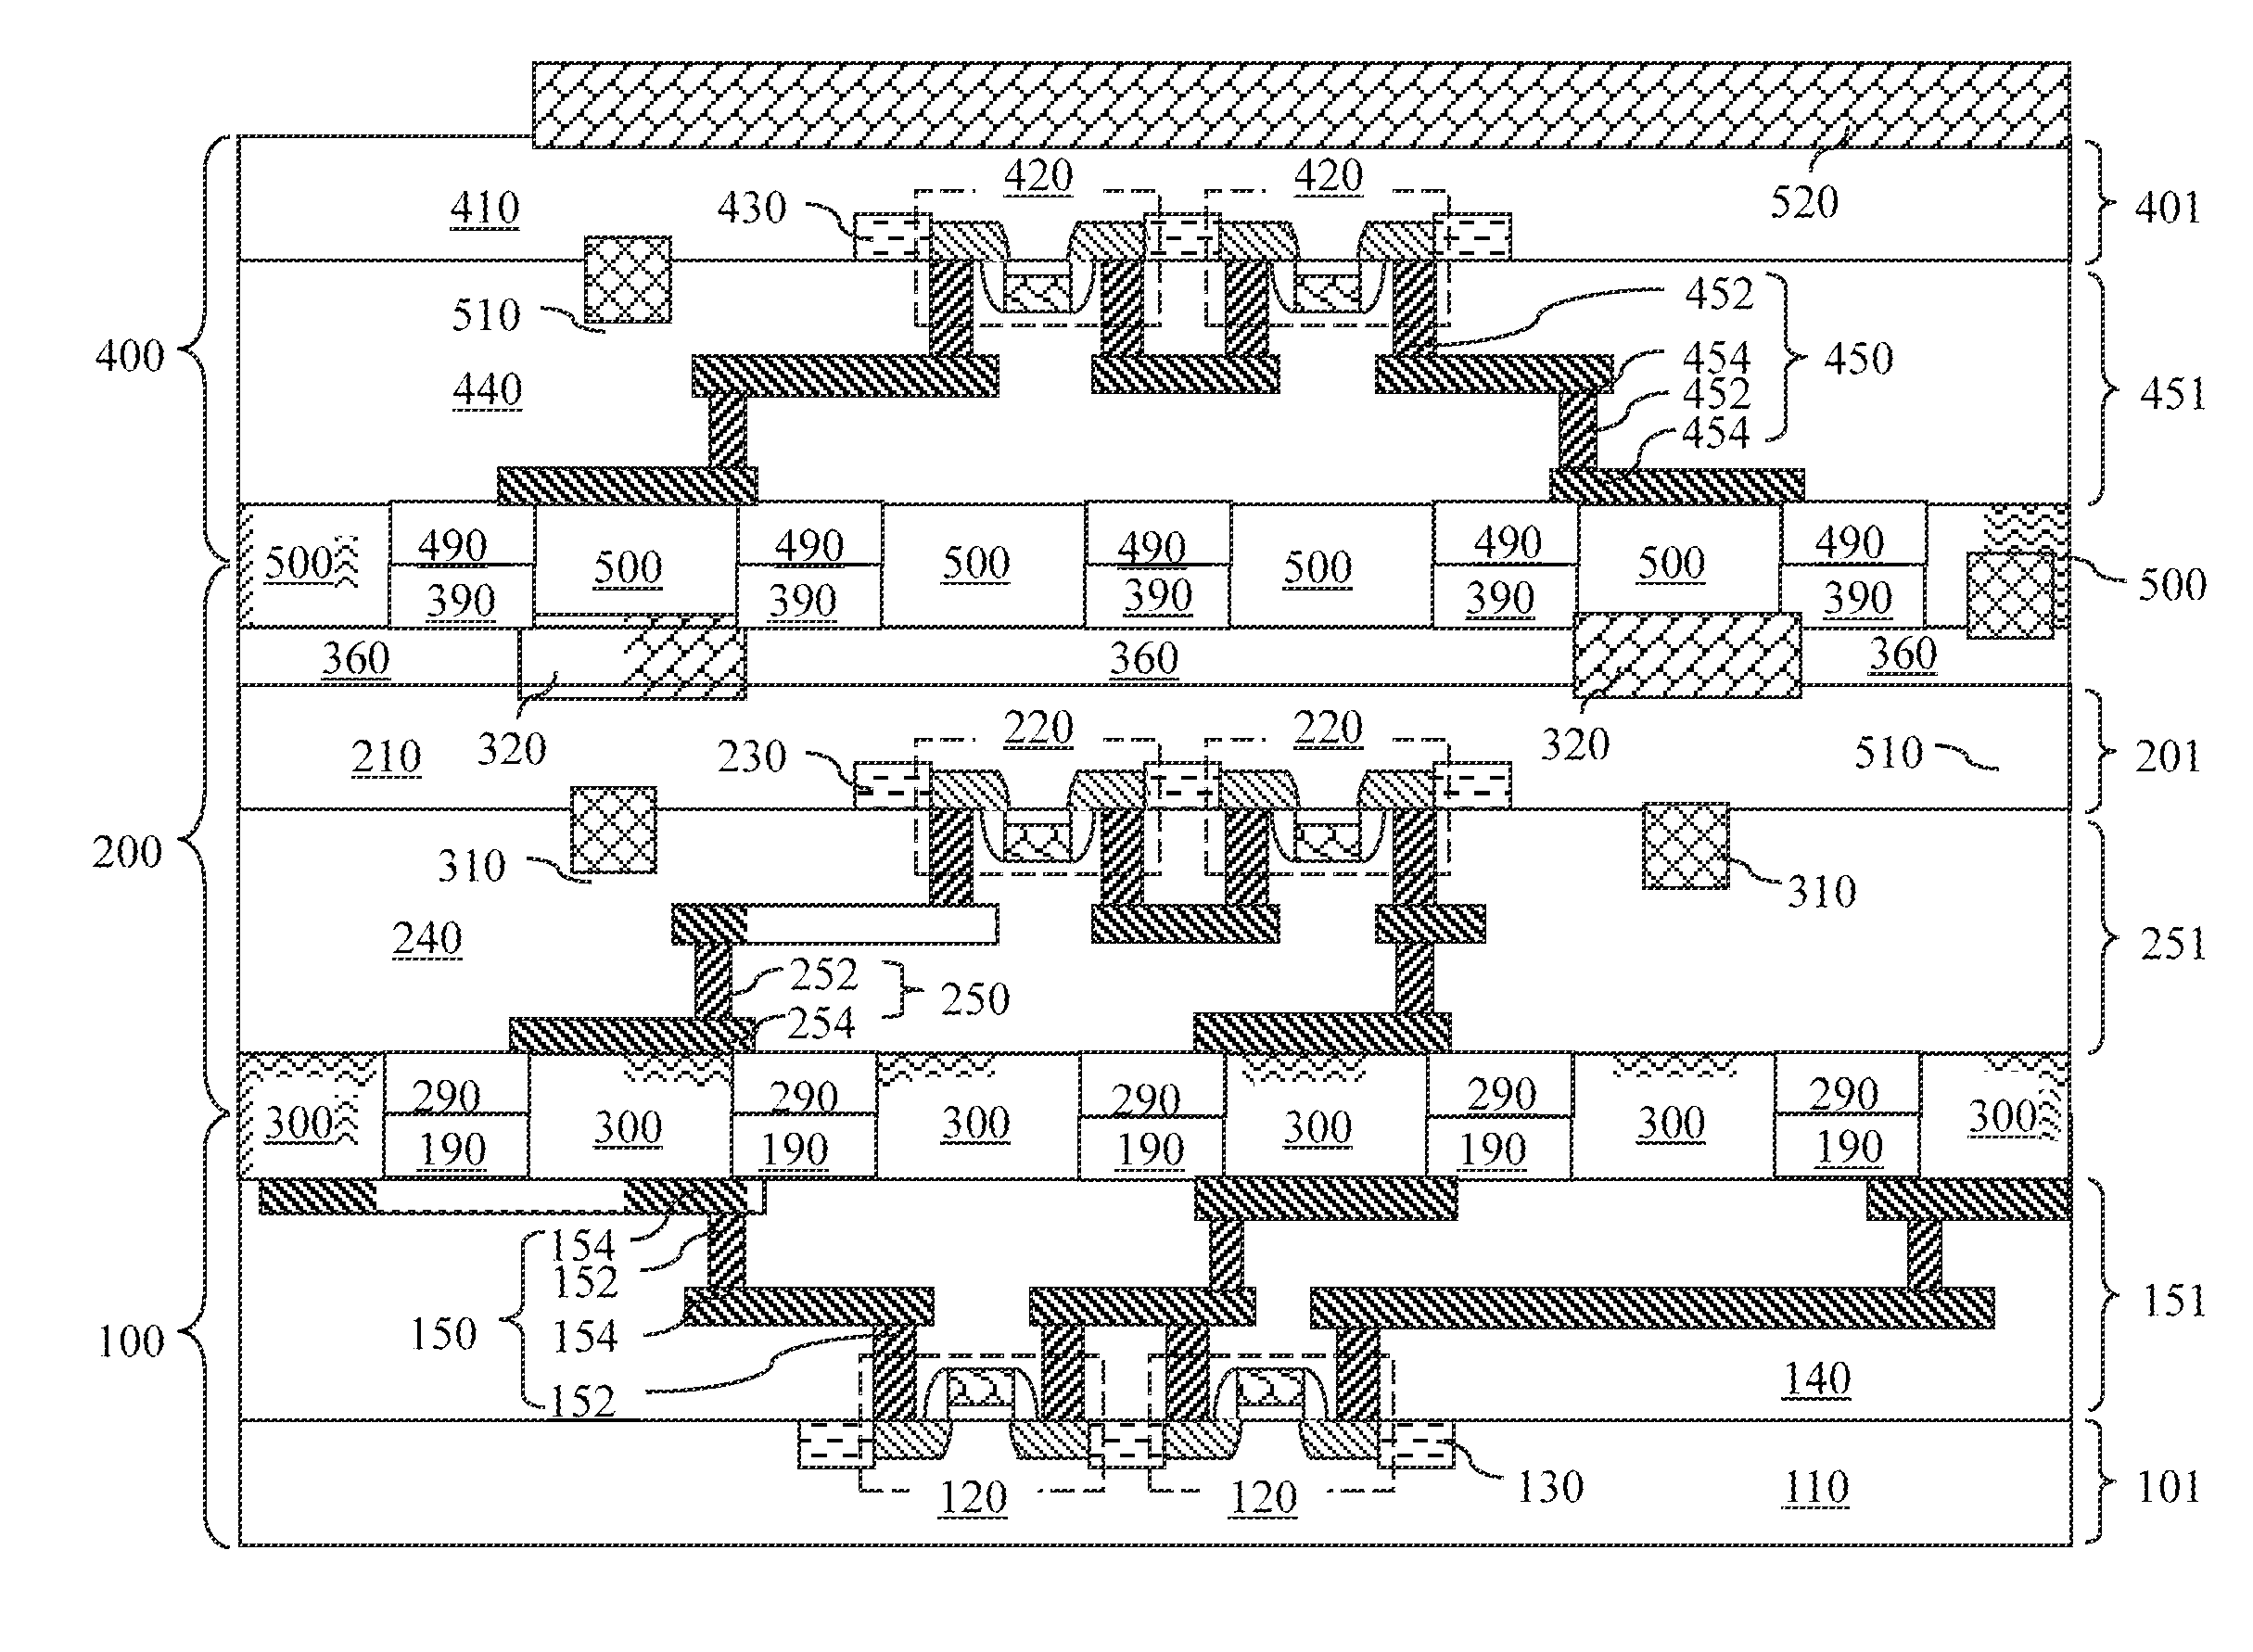 Bonded structure employing metal semiconductor alloy bonding